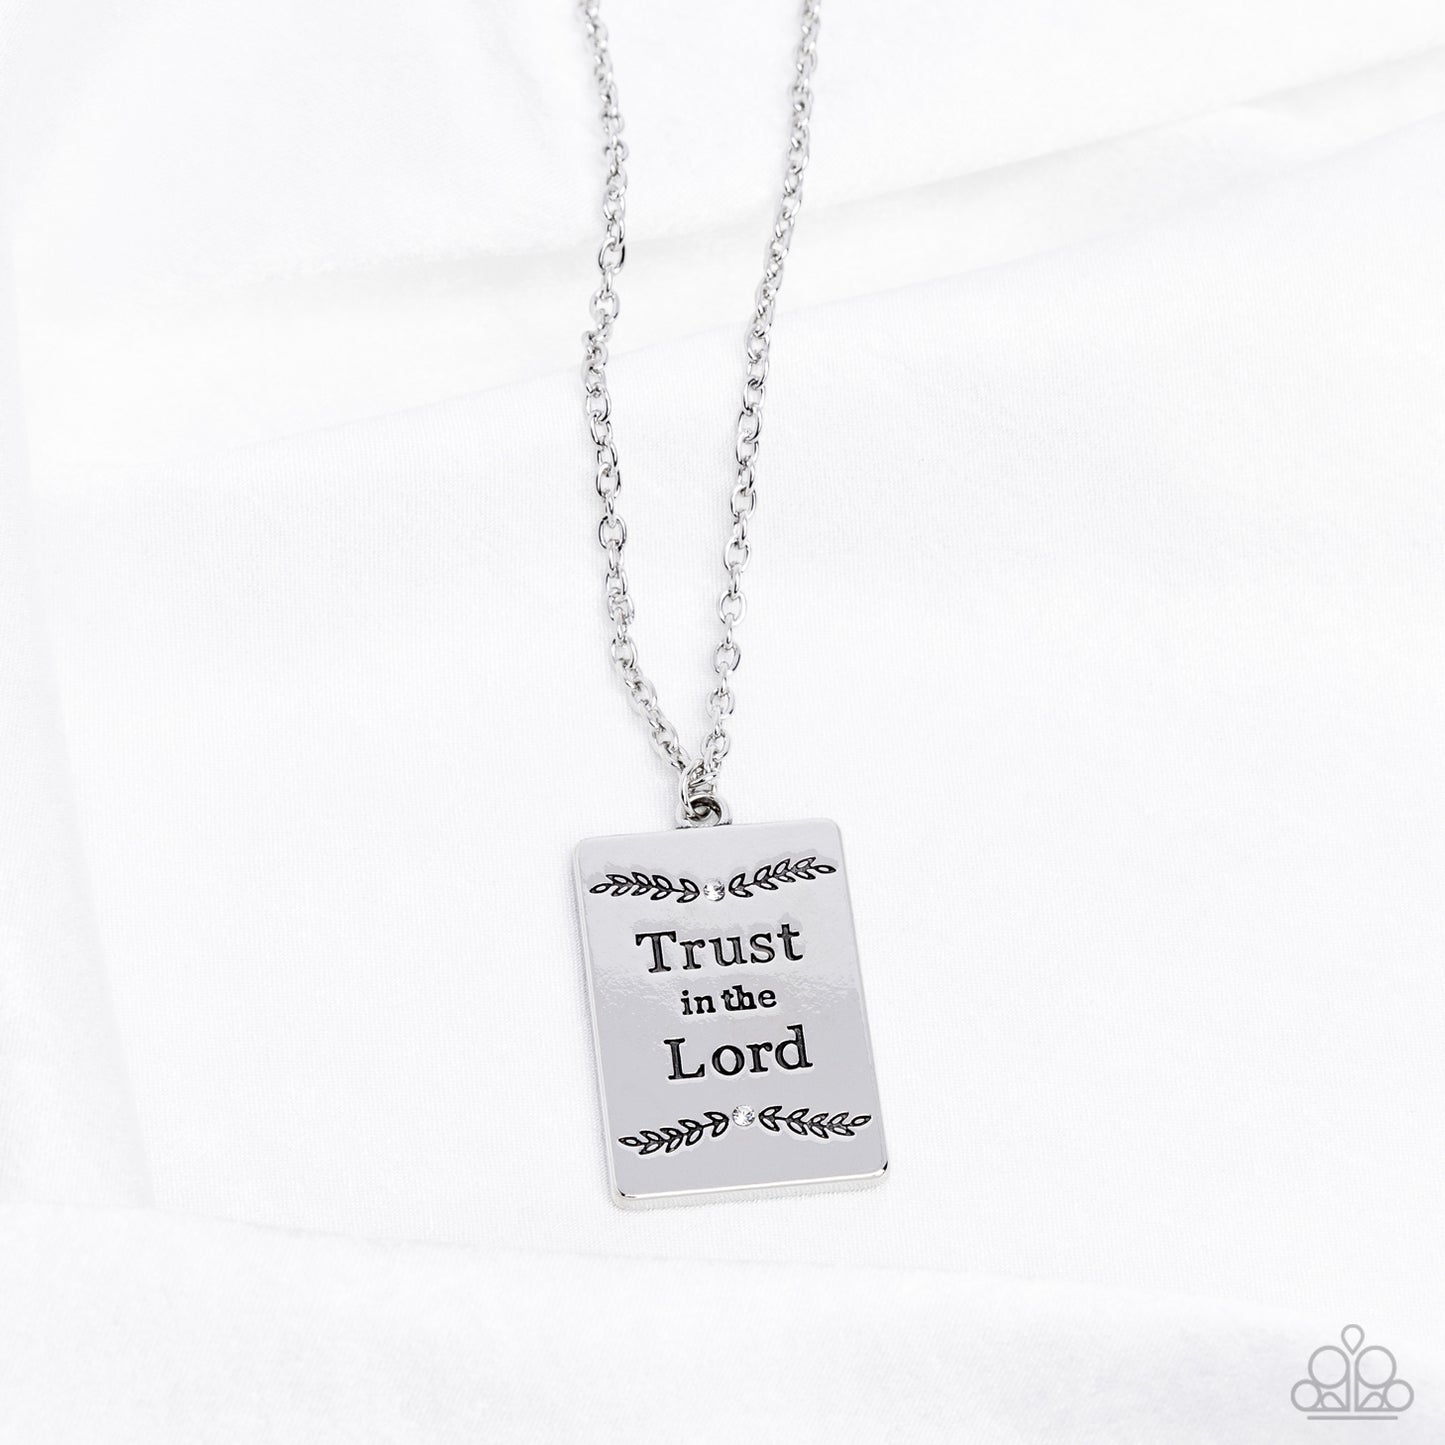 Paparazzi Accessories - All About Trust - White Necklace Inspirational